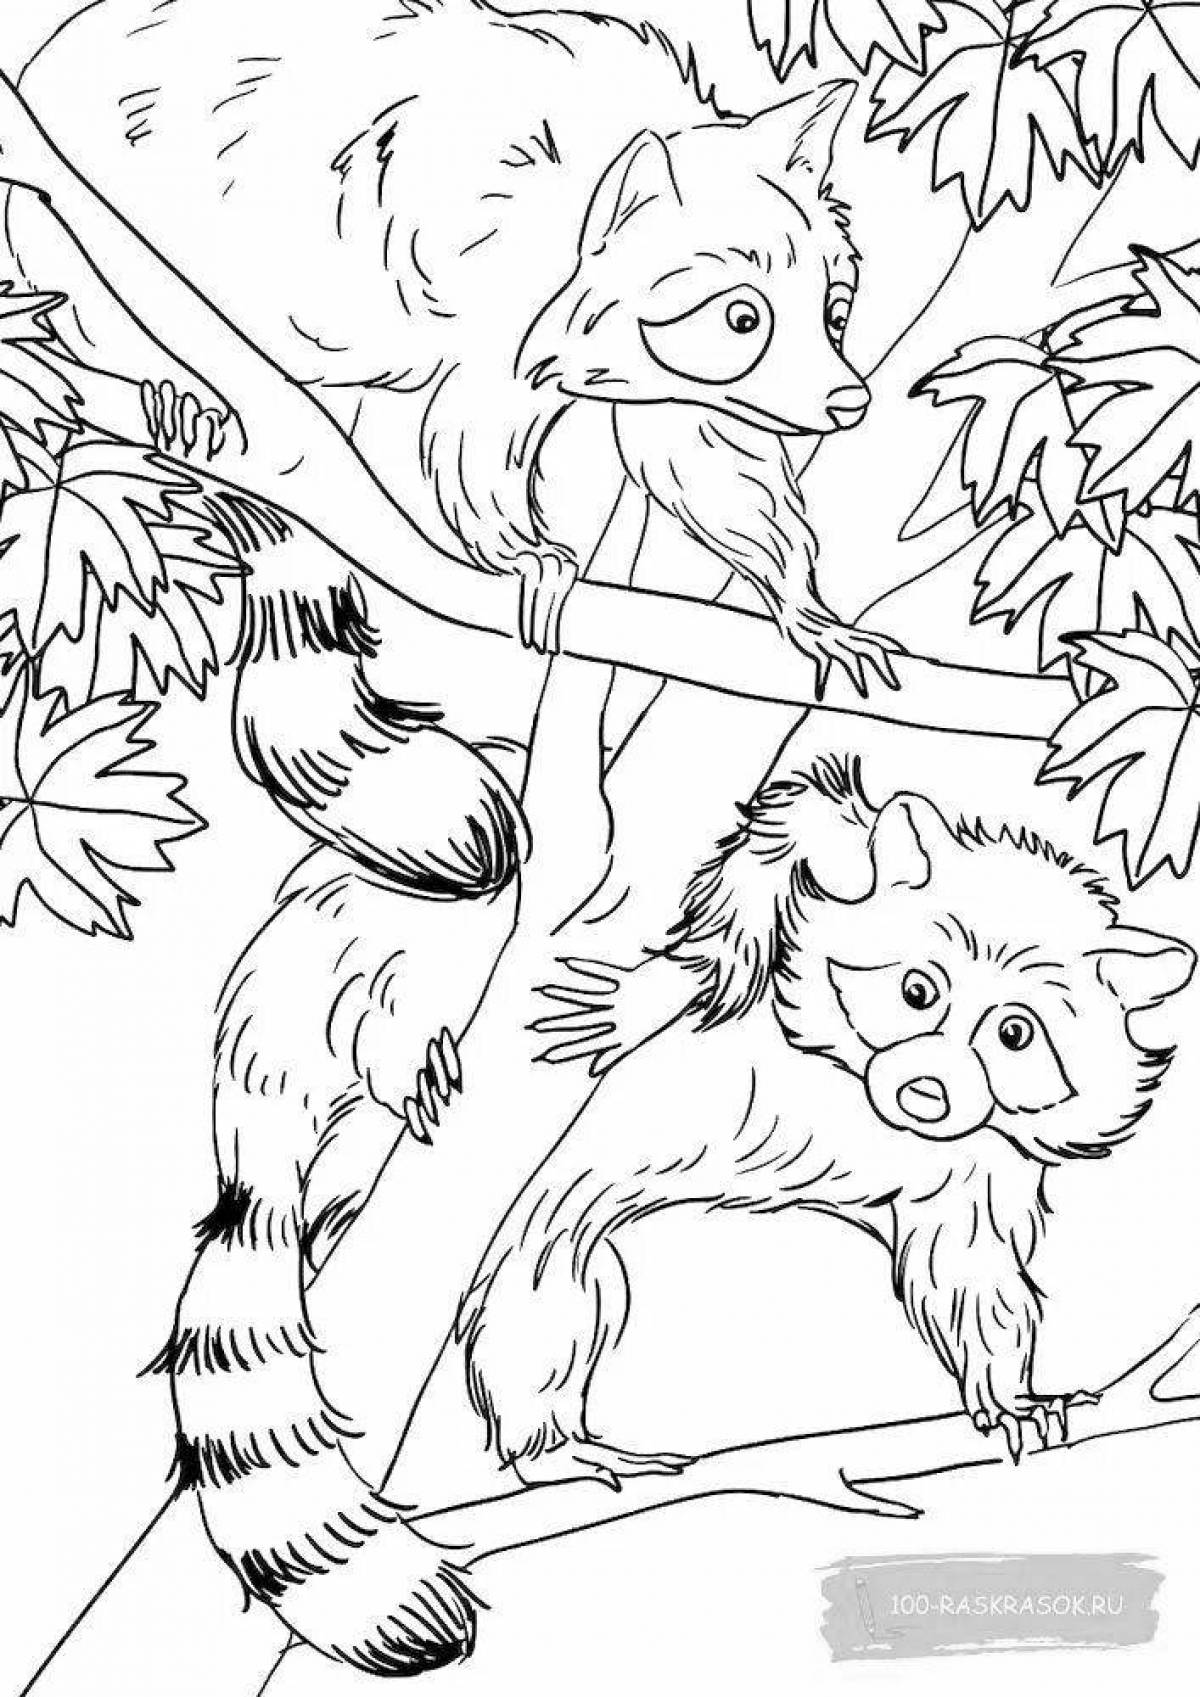 Naughty raccoon coloring page